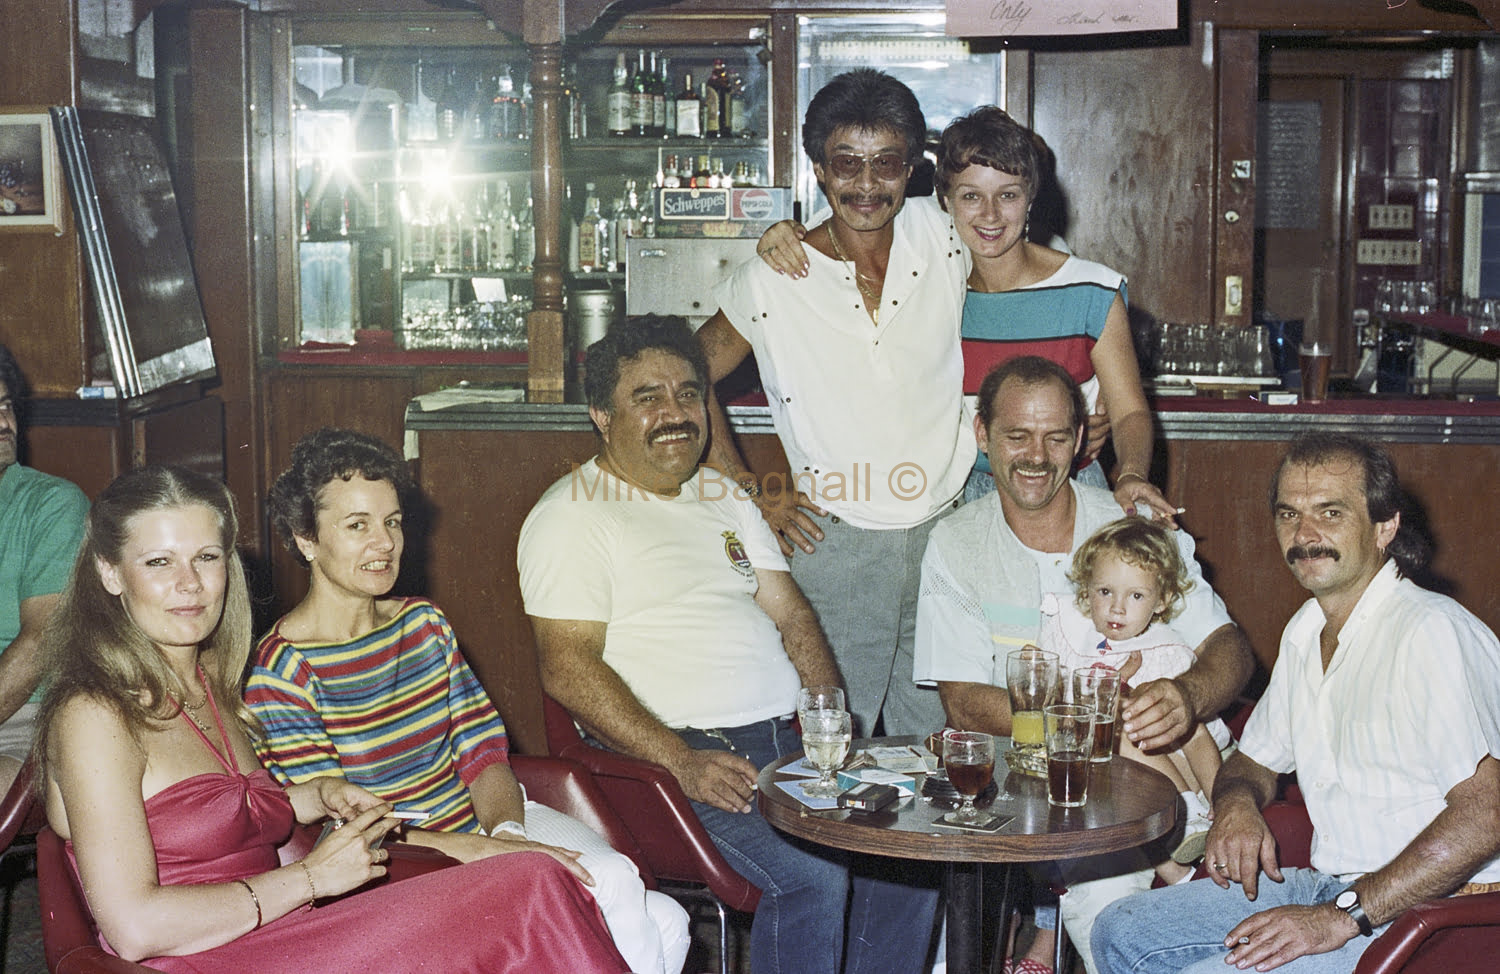 04_Bugsy_Henson Park Hotel_22-UK, UK, Bill Pitman, Taylor Wong, Jan Merry, Bugsy Merry & Daughter, Willie Fenell